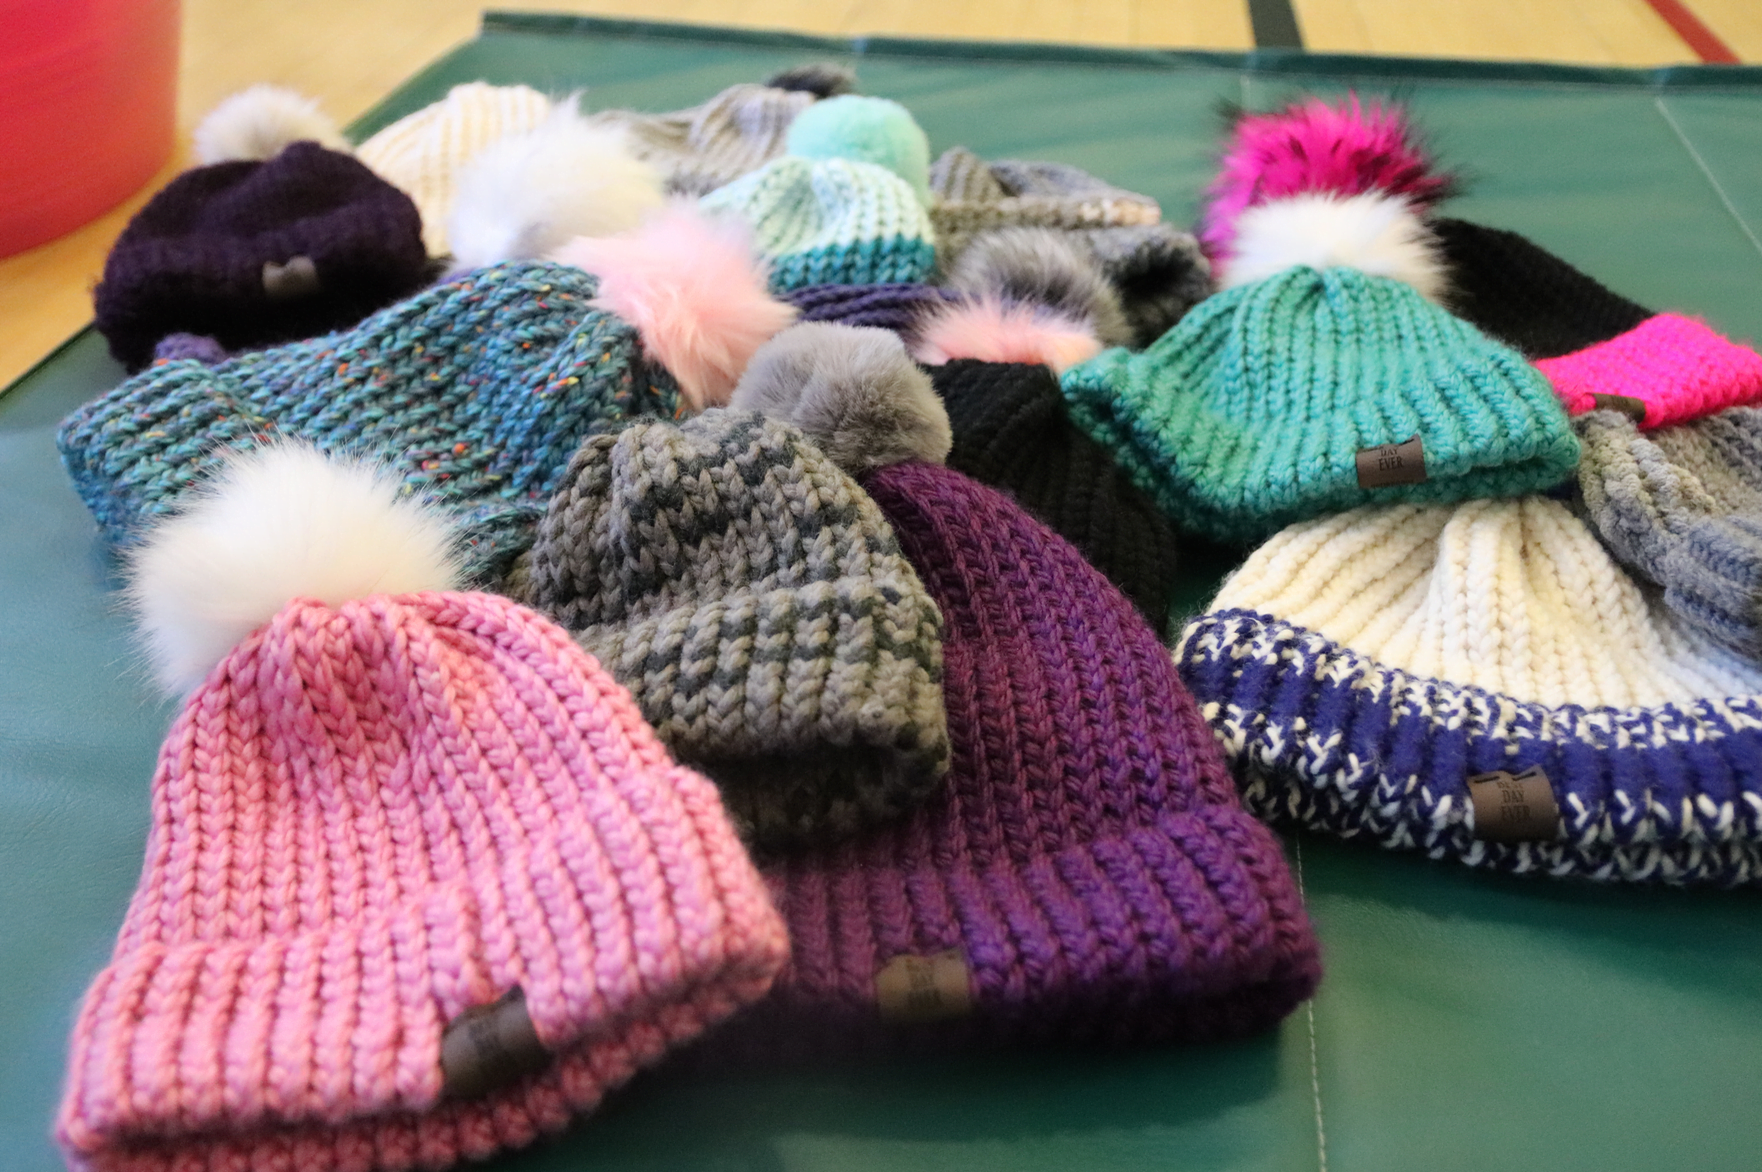 The "Best Day Ever" knitted hats come in a variety of colors. Feb 21, 2020 Photo: Leslie Yager